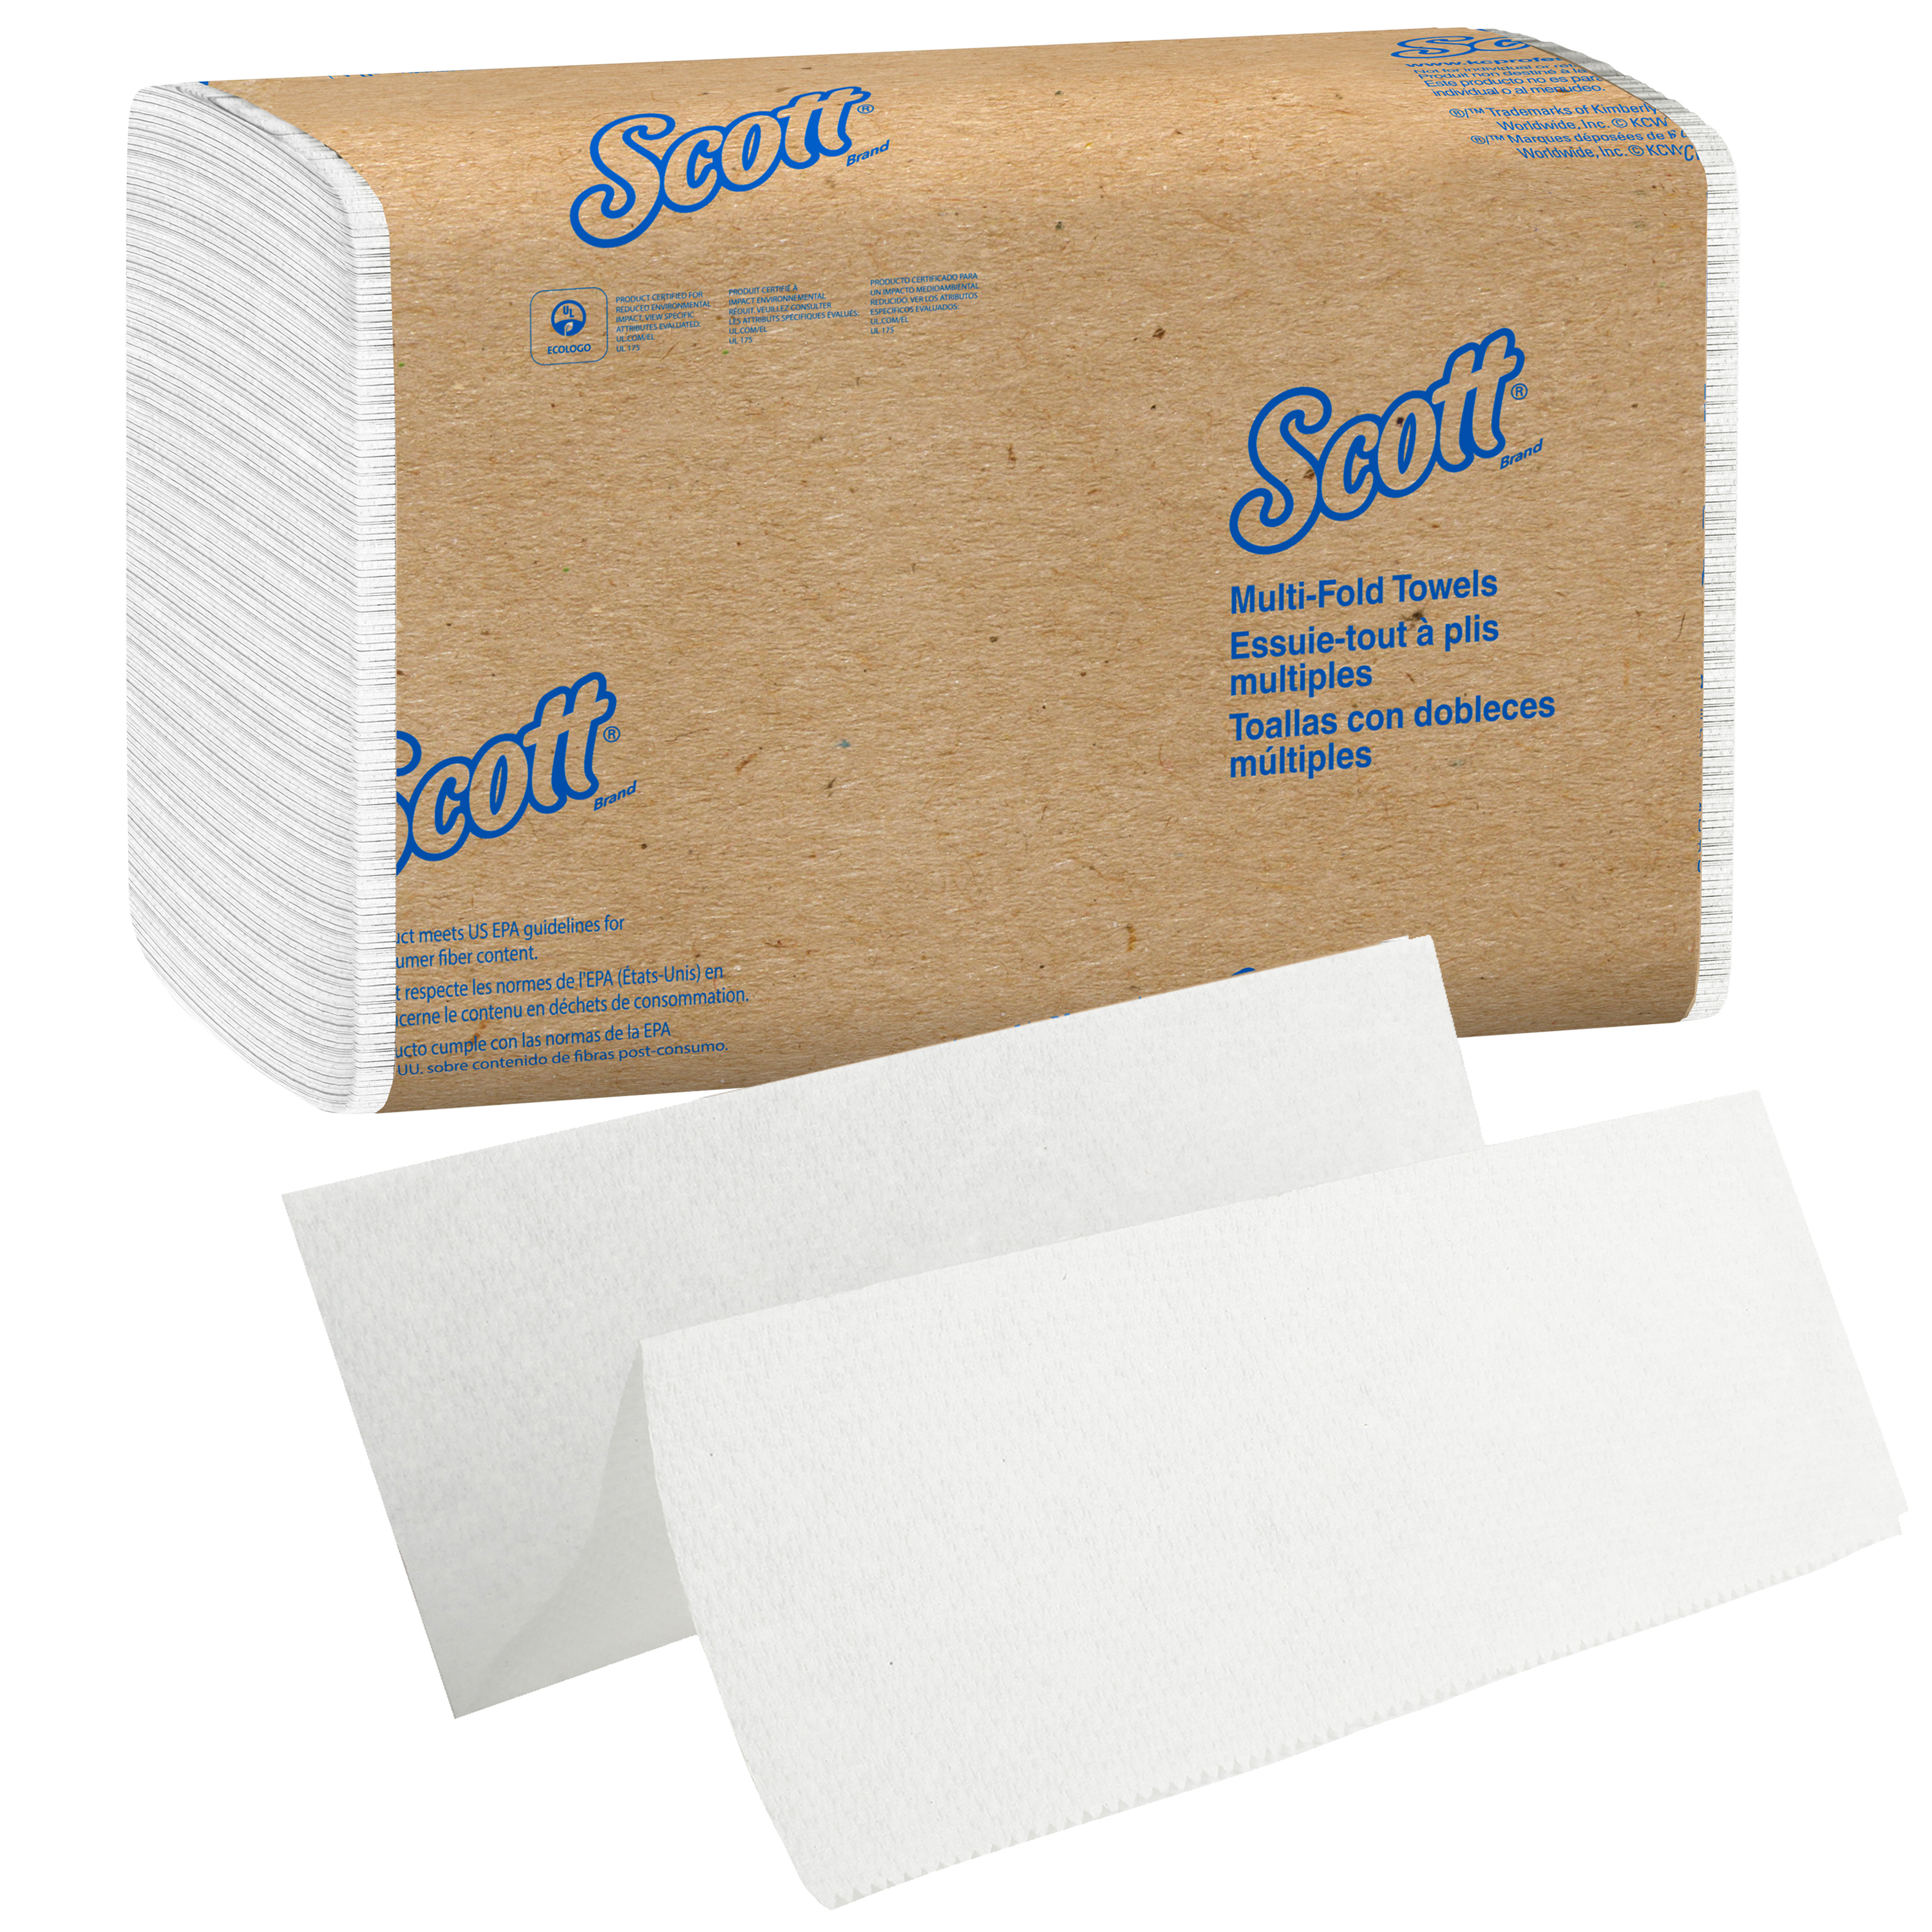 Picture of KC 1804 Premium Multi-Fold Towels, Absorbency Pockets, 9 1/5 x 9 2/5, 250/Pack, 16 Pack/Carton